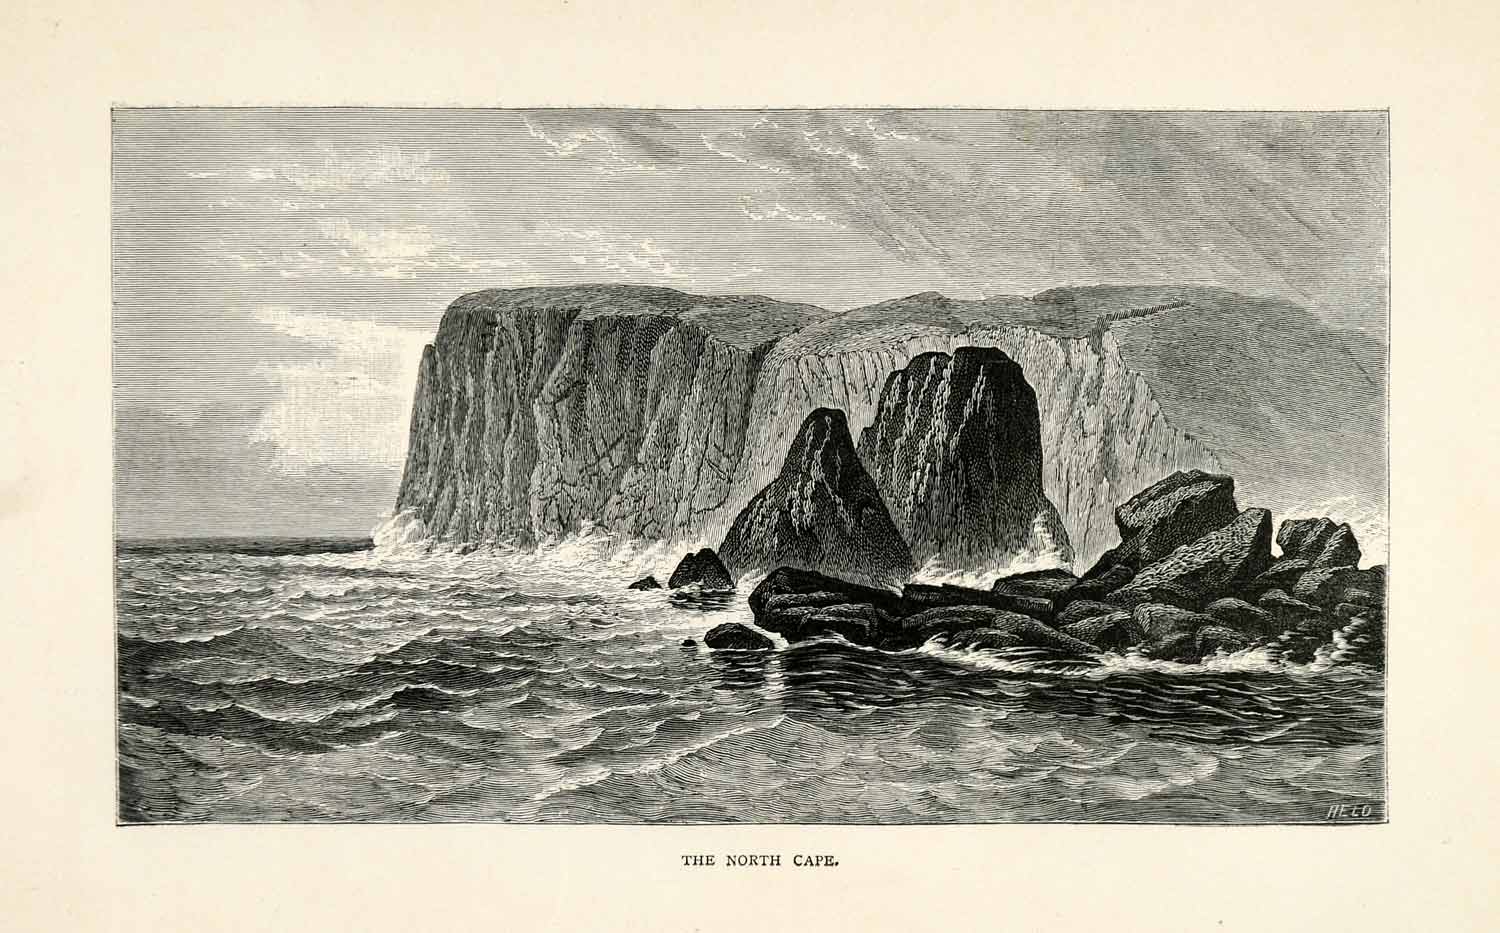 1882 Steel Engraving North Cape Norway Mageroya Island Landscape Cliff Art XGT9